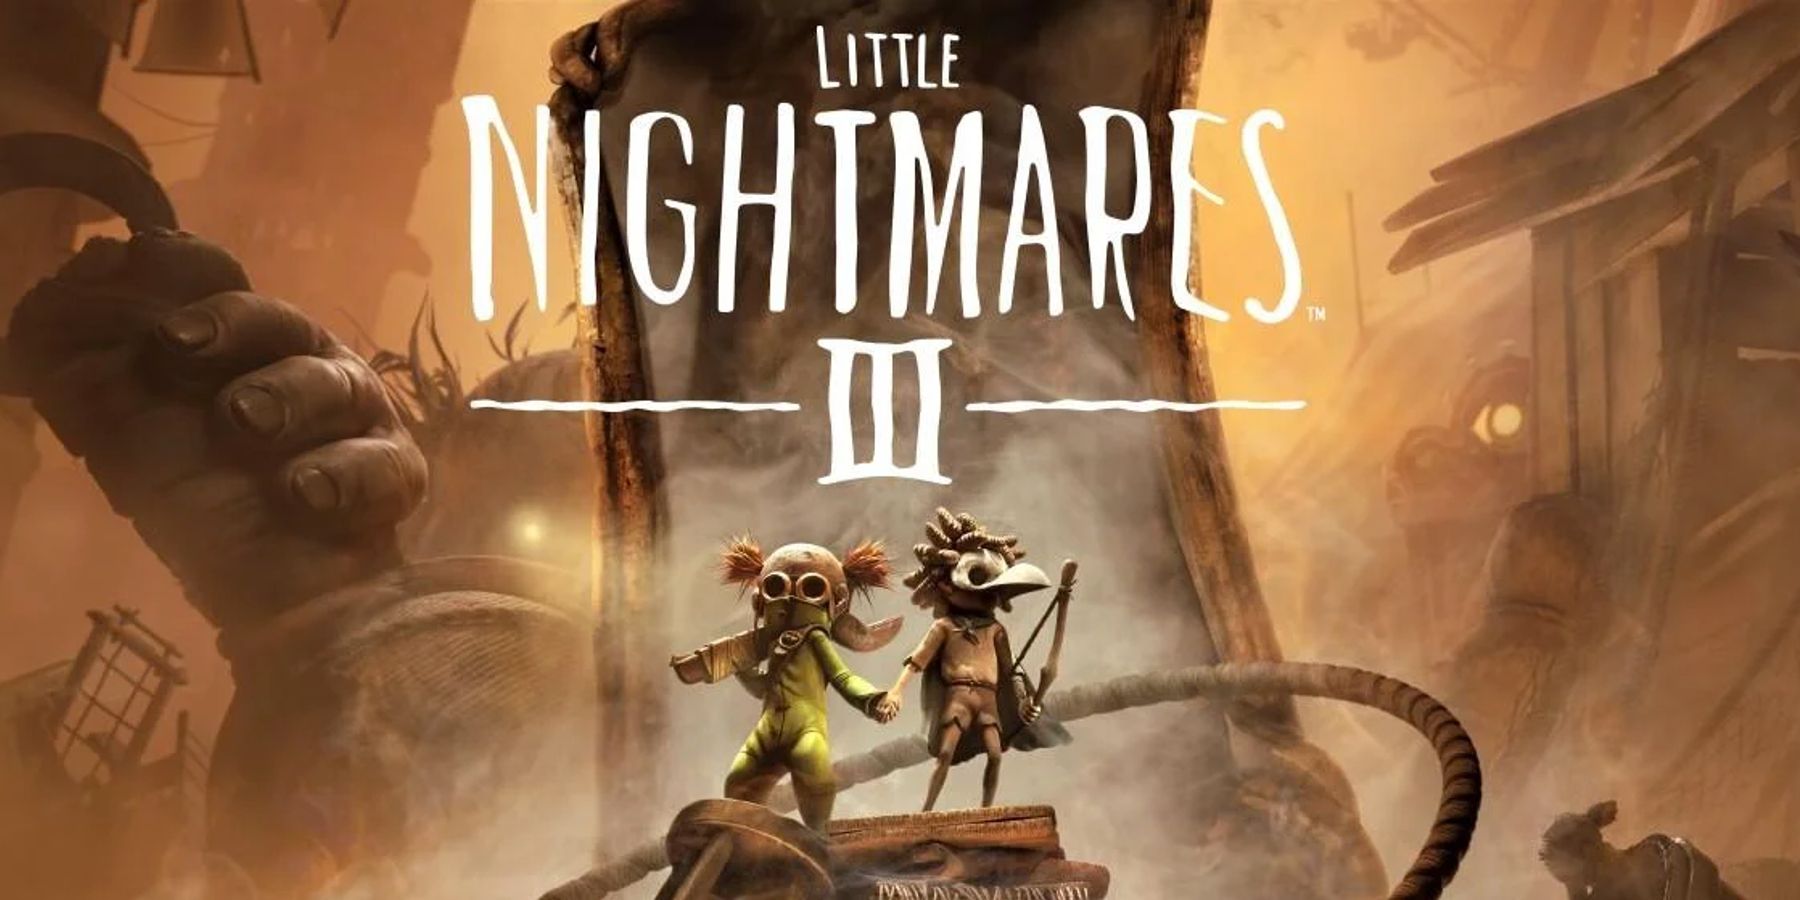 Little Nightmares 3 May Have New Protagonists, But One Threat is Likely Around The Corner